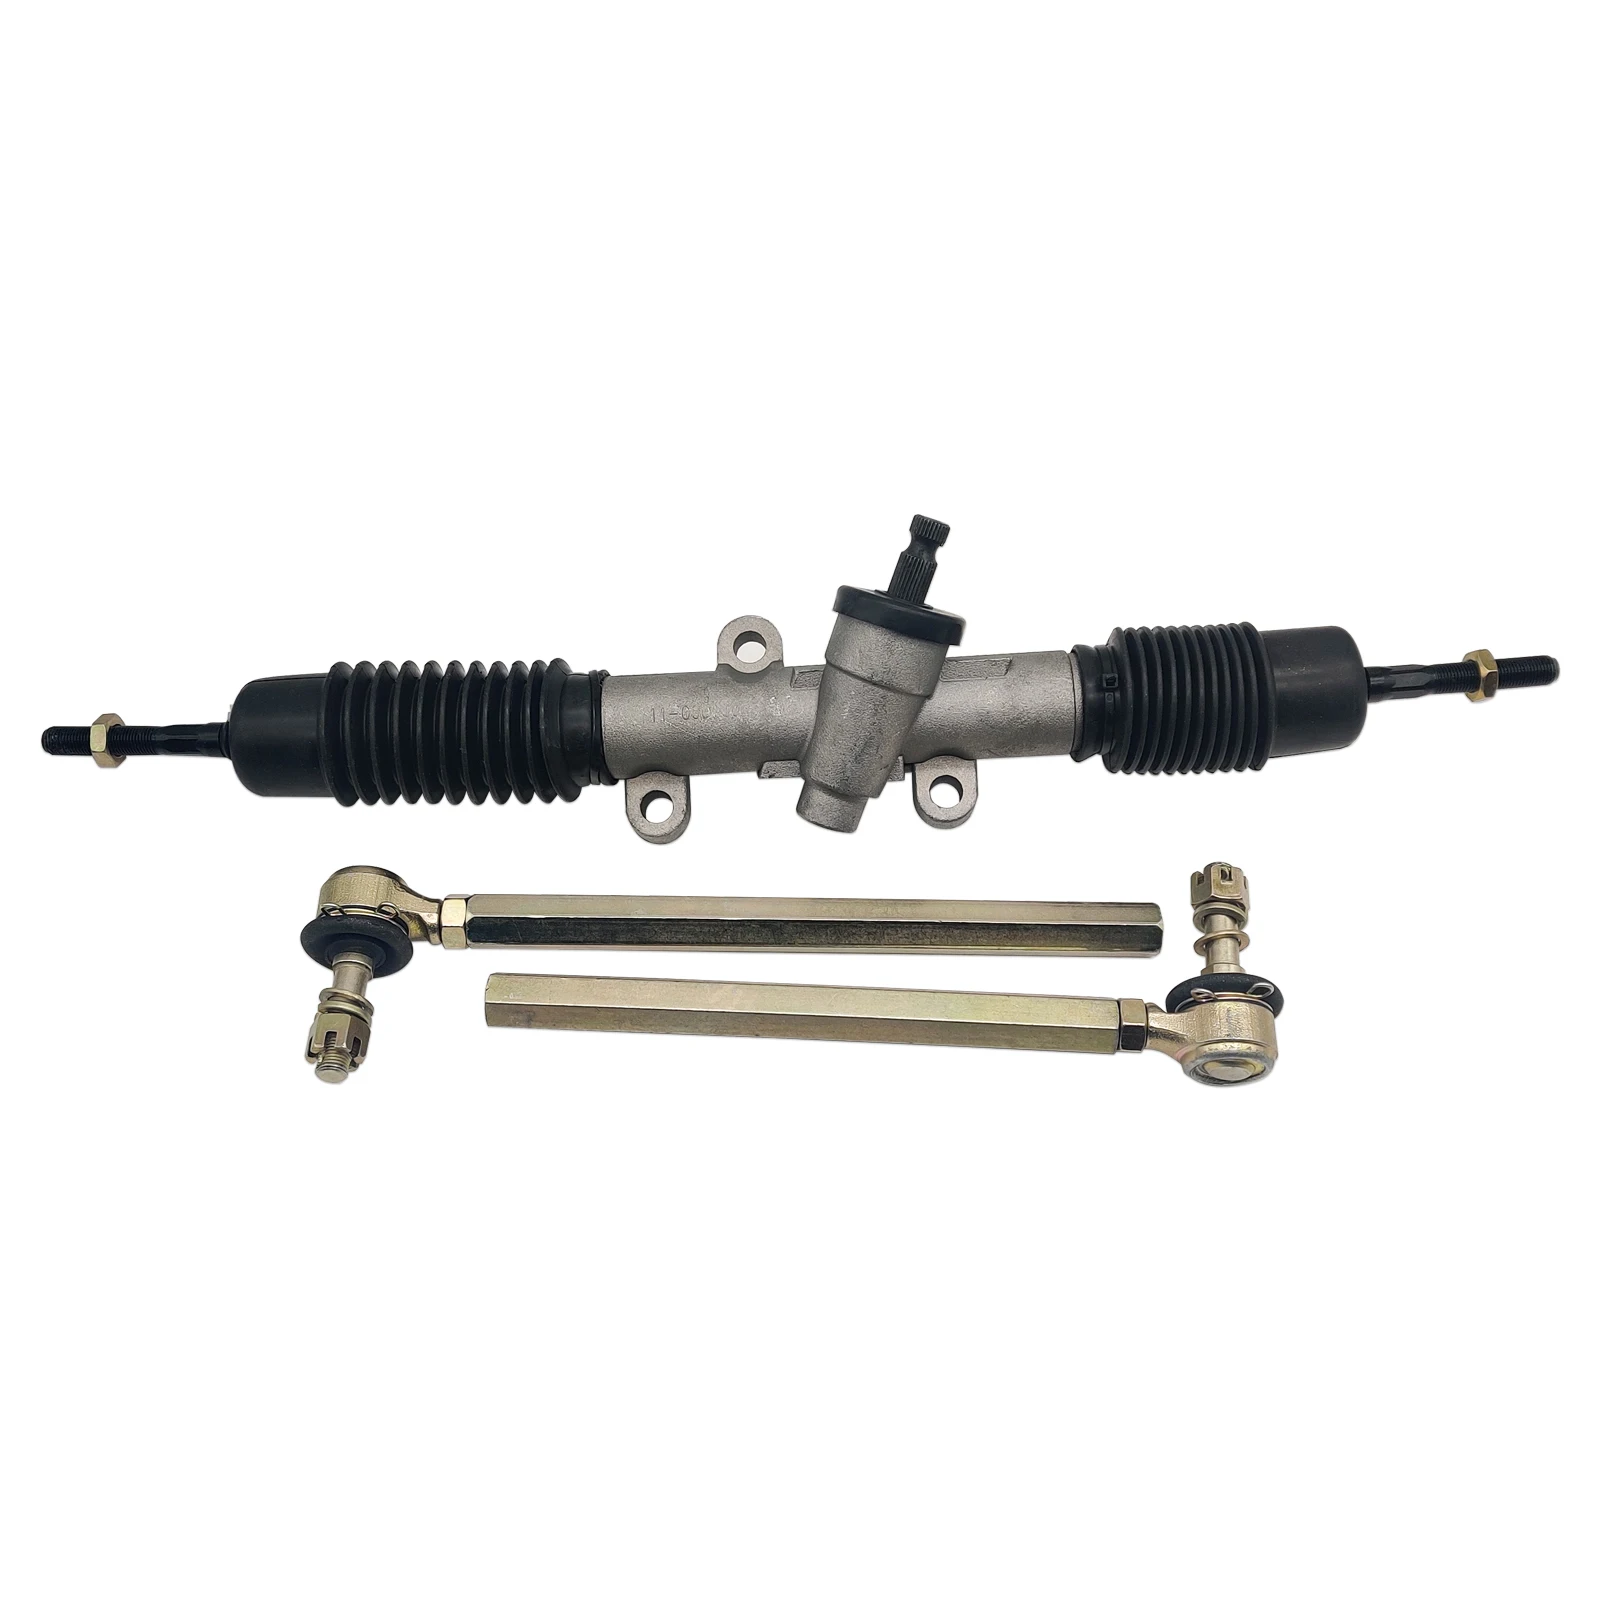 Redirector Assy With Tie Rod Ball Head Assembly For Odes 800 UTV Dominator 13205100000 10905100081